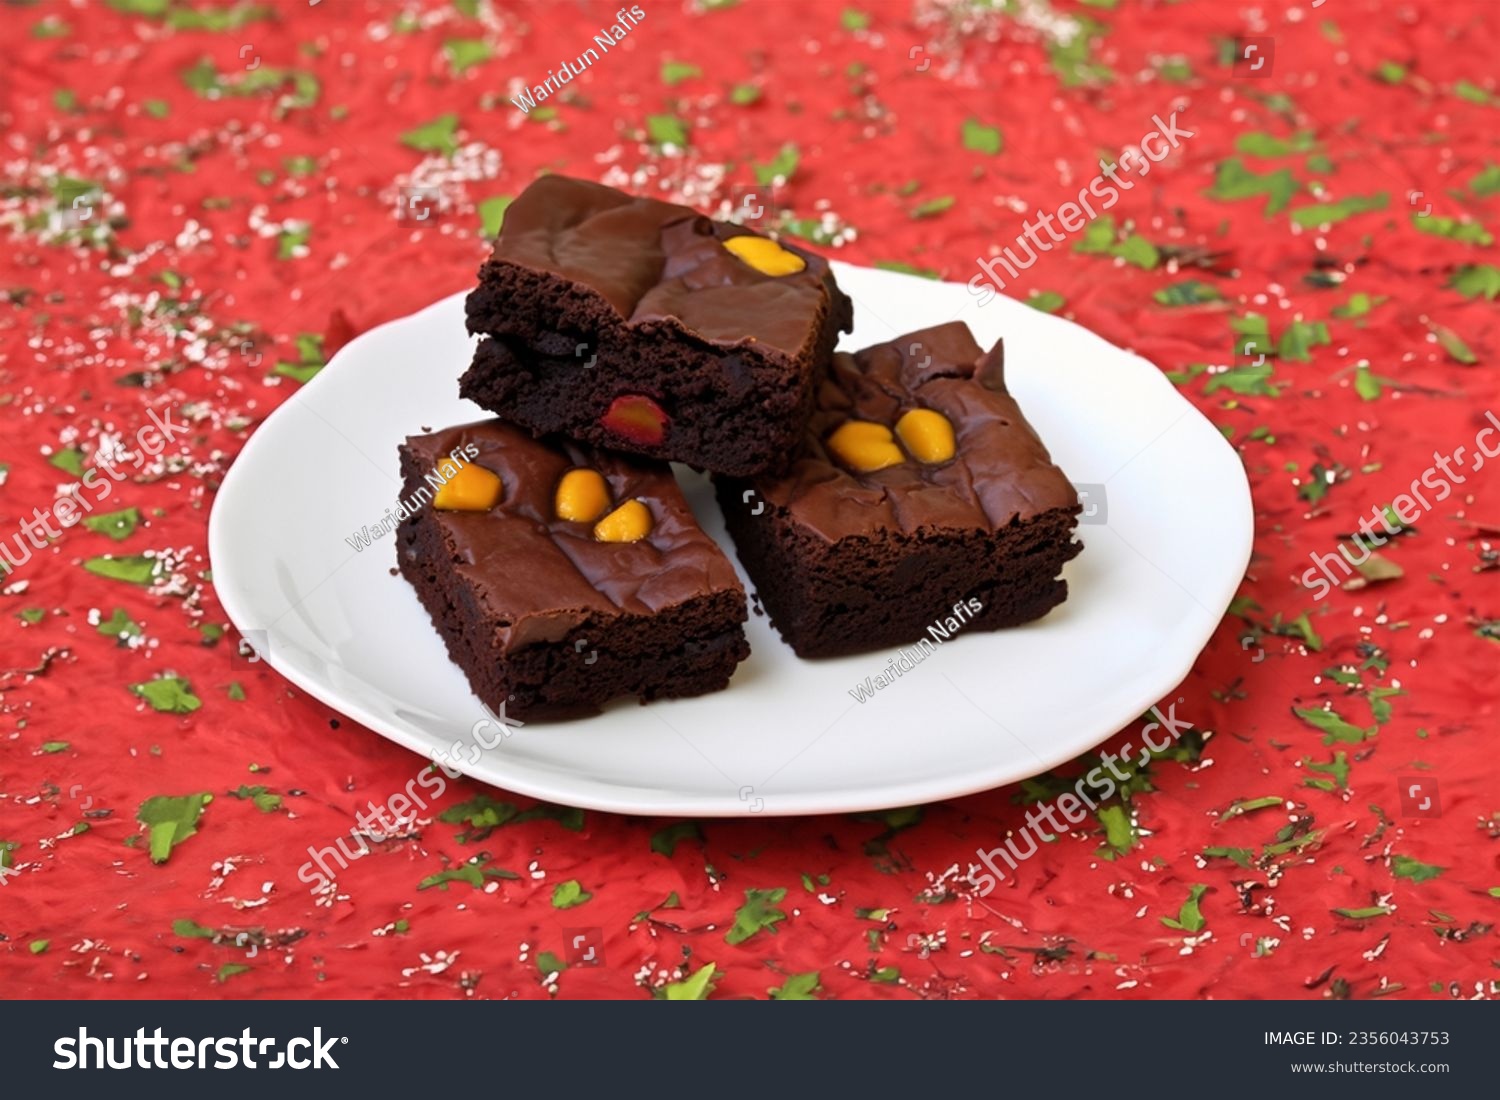 Chocolate Lover's Dream: Savoring a Piece of Brownie Bliss #2356043753